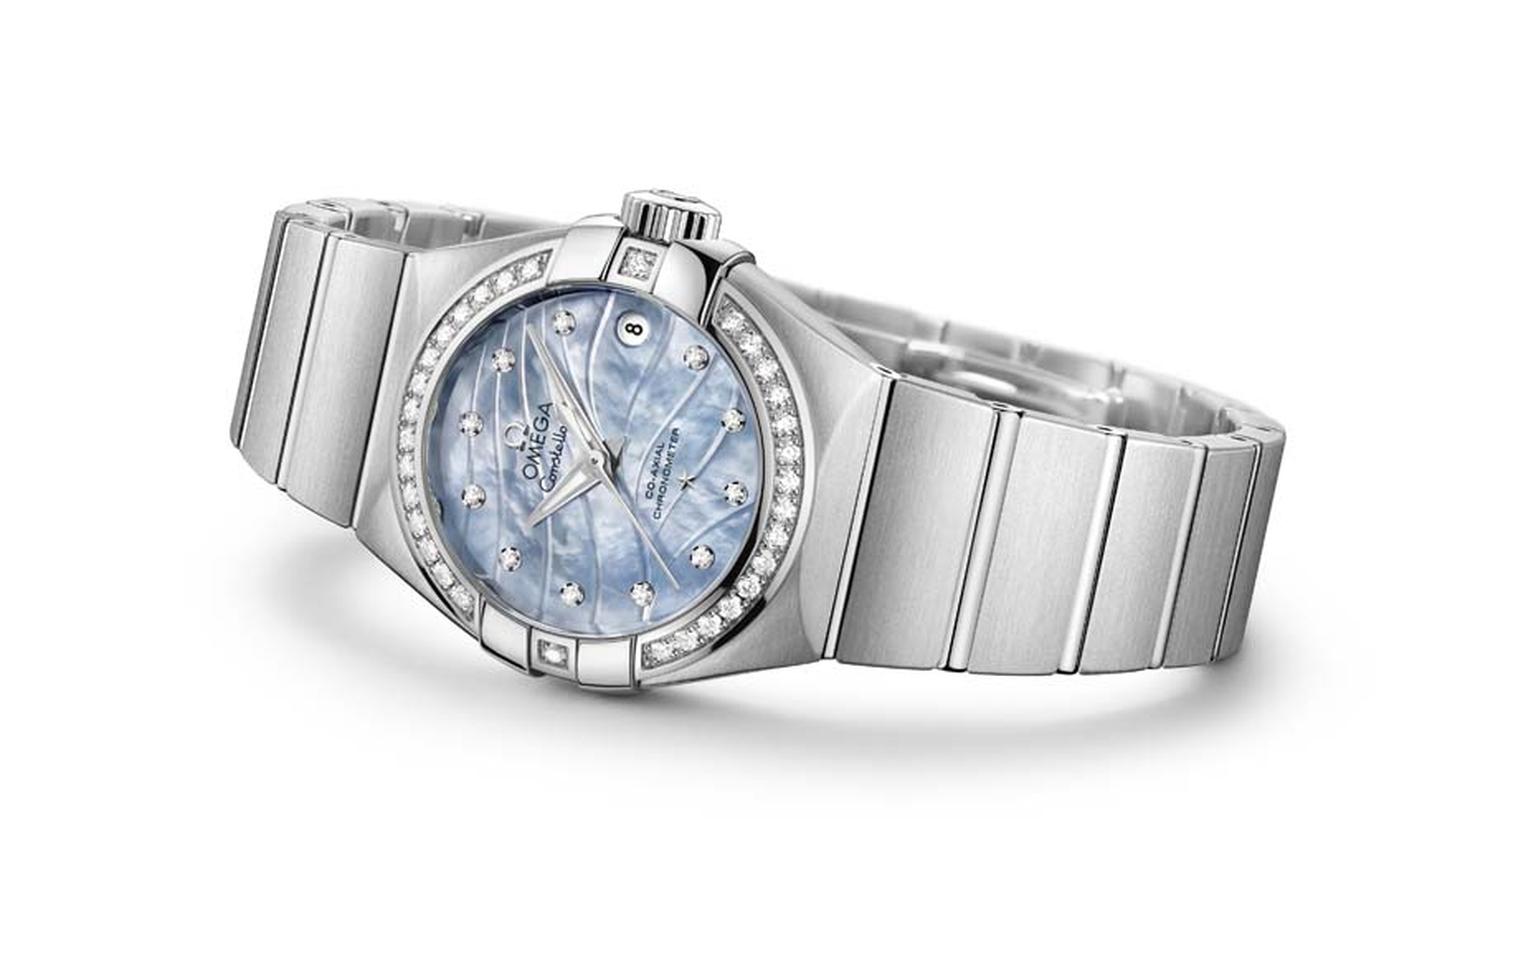 The stainless steel Omega Constellation Pluma features a blue mother-of-pearl engraved dial set with diamonds.